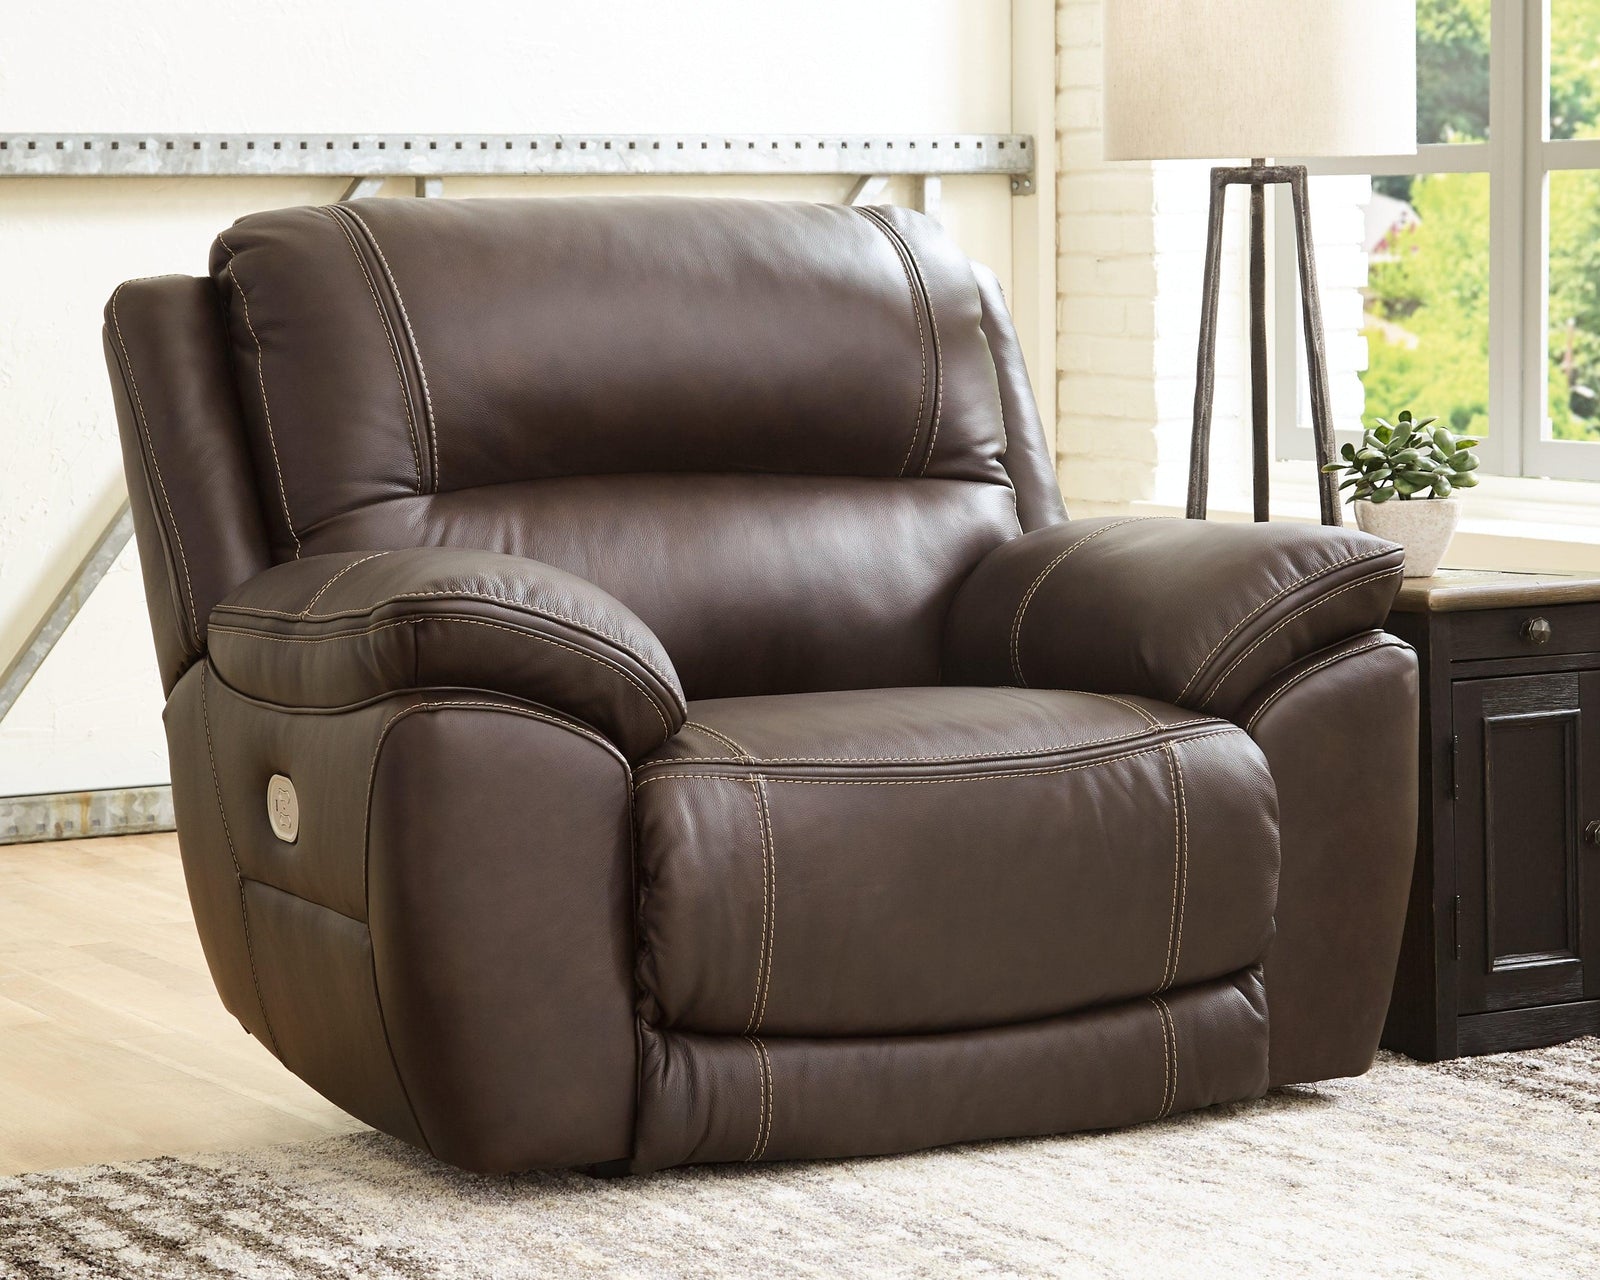 Dunleith Chocolate Leather Power Recliner